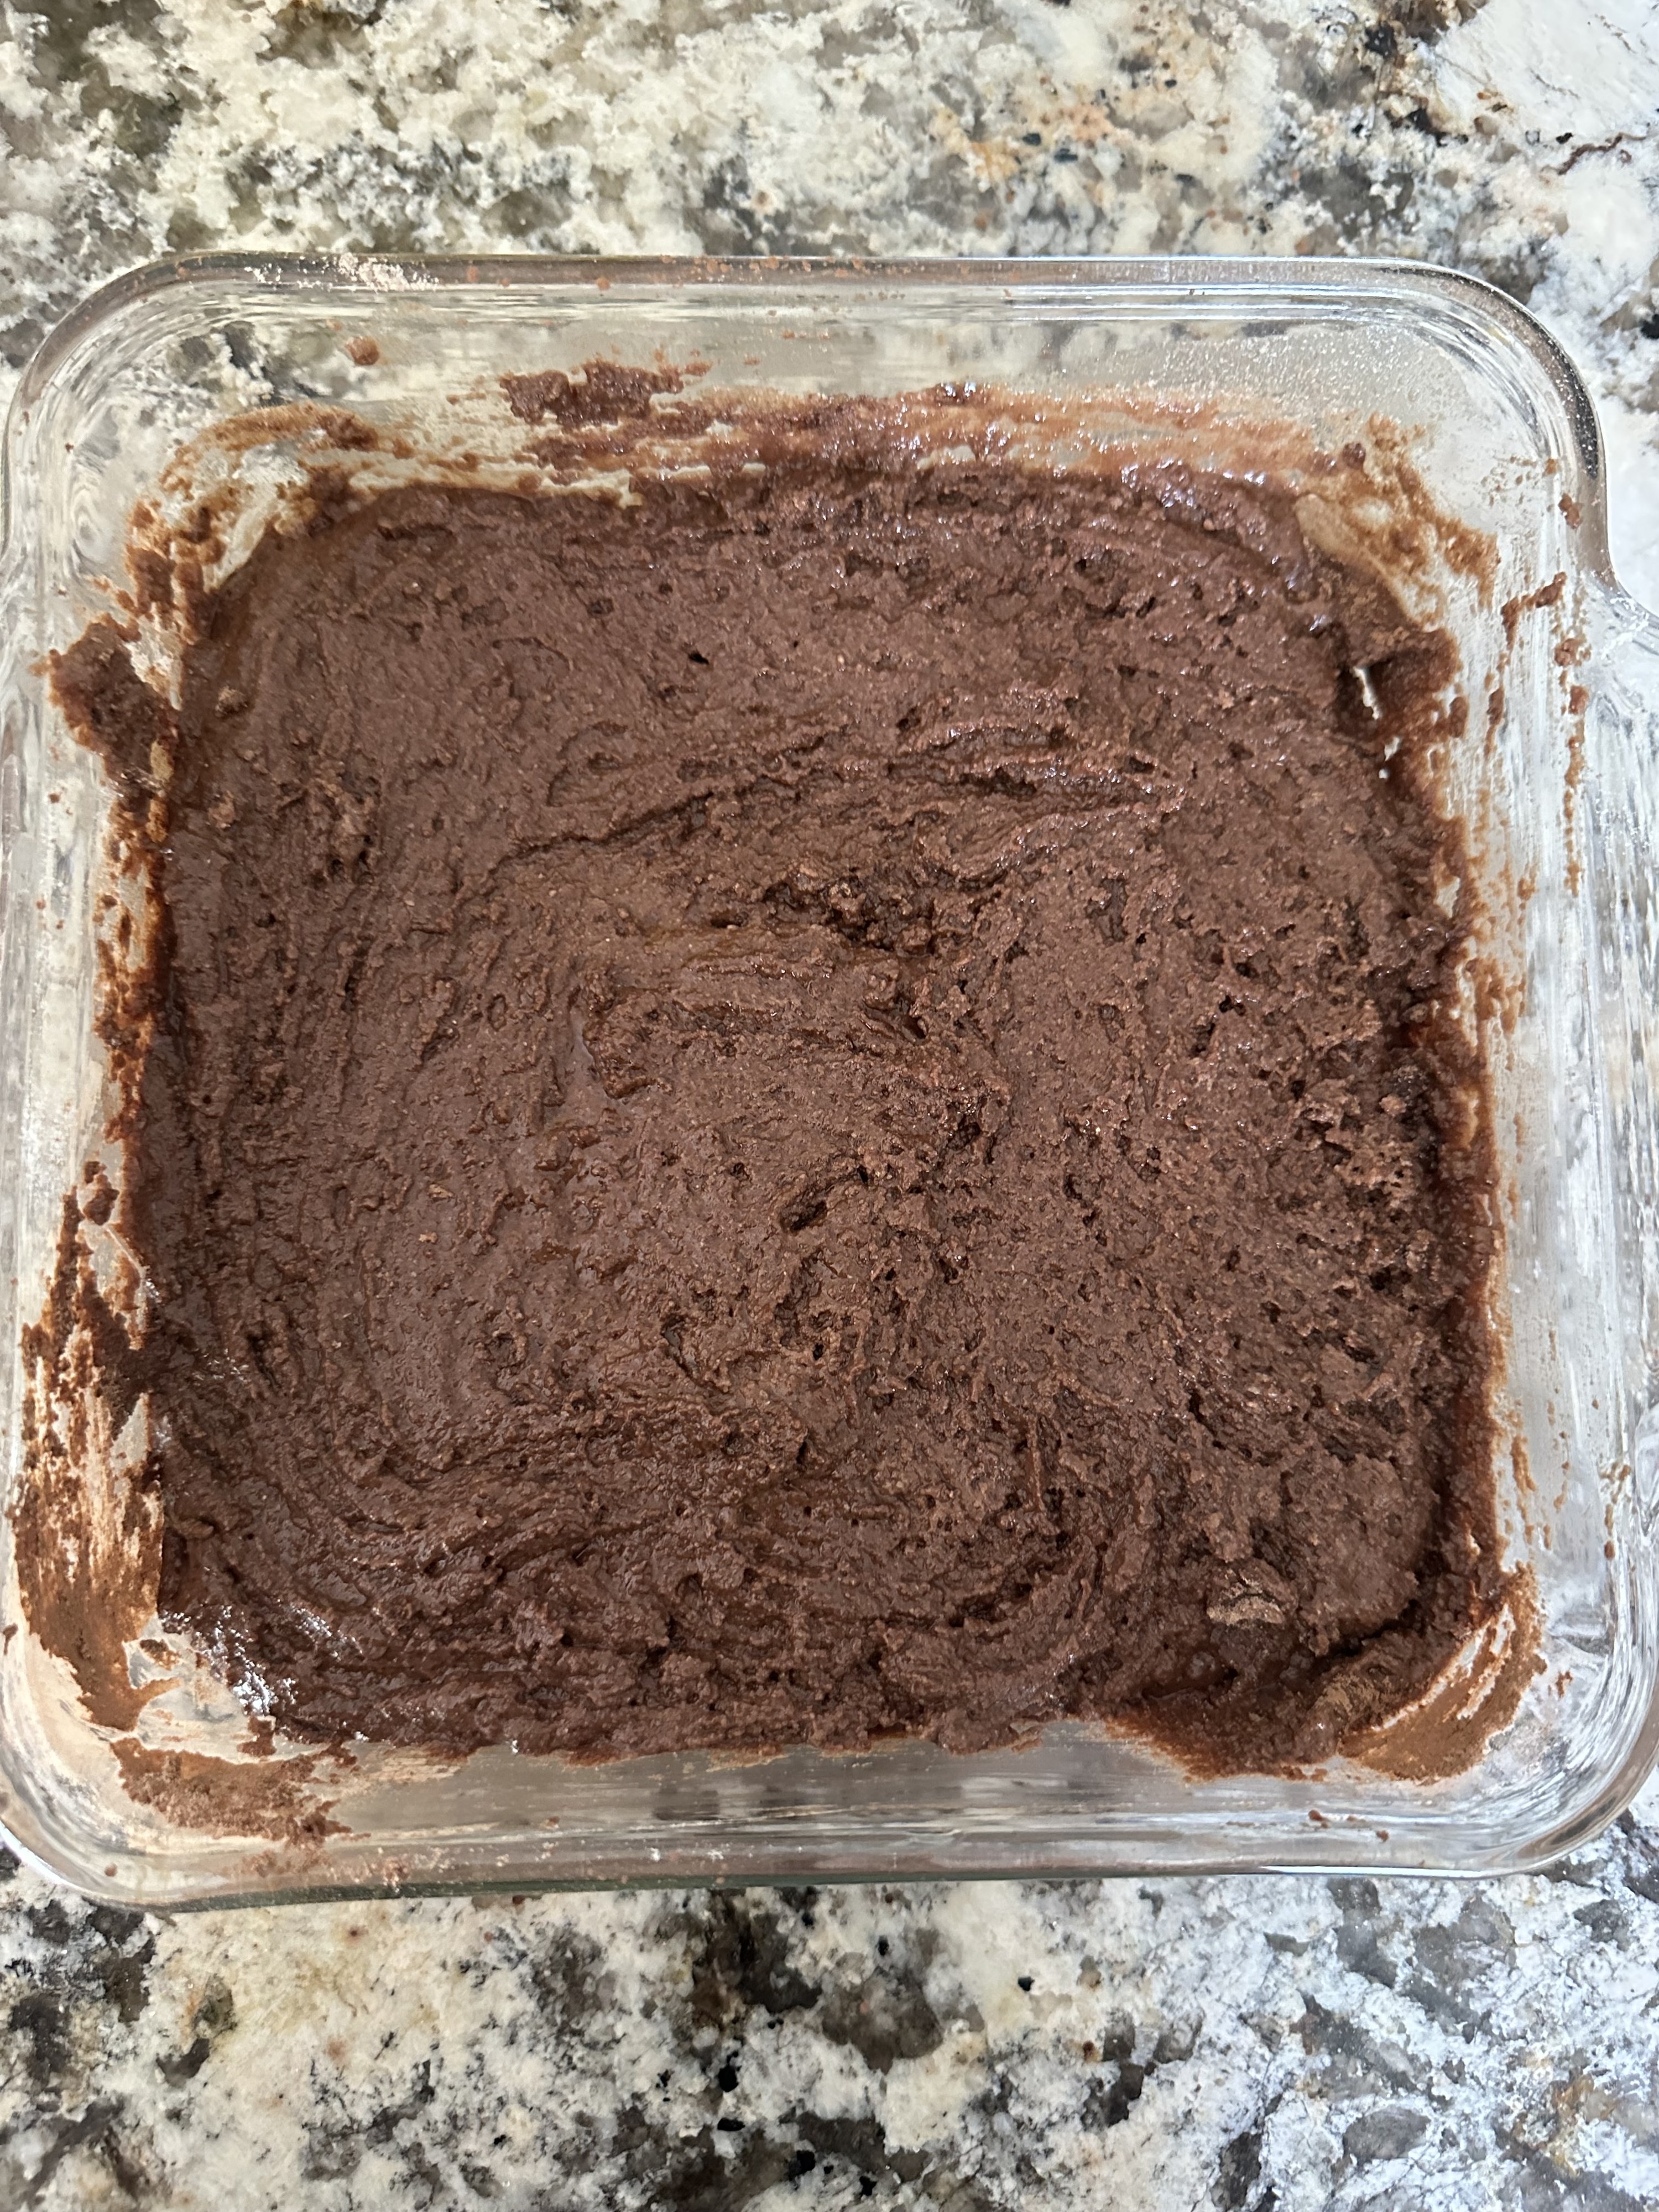 a cake ready to be baked in an oven